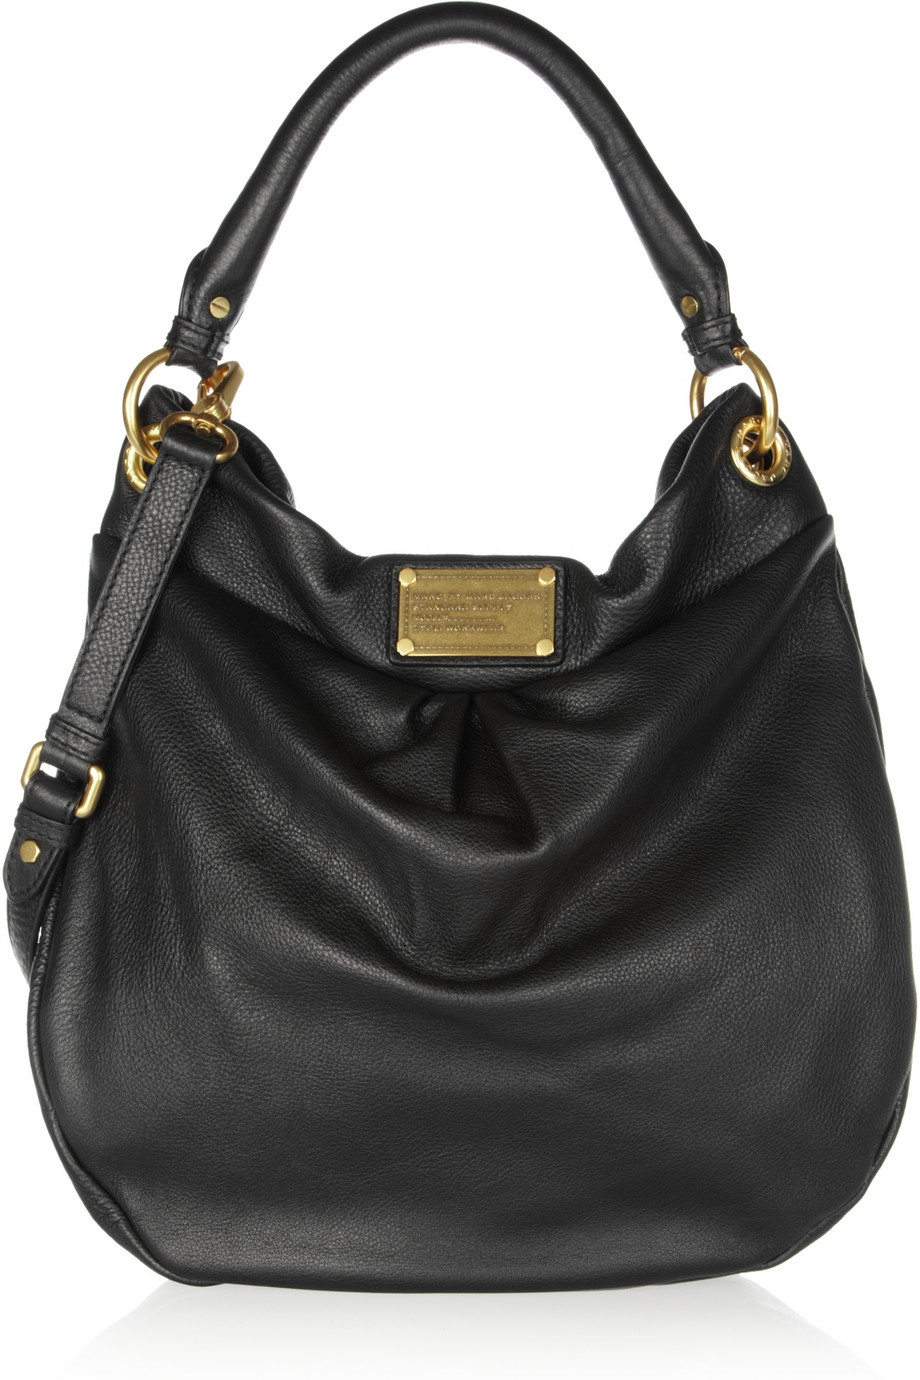 Marc by Marc Jacobs Classic Black Hobo - Bag at You